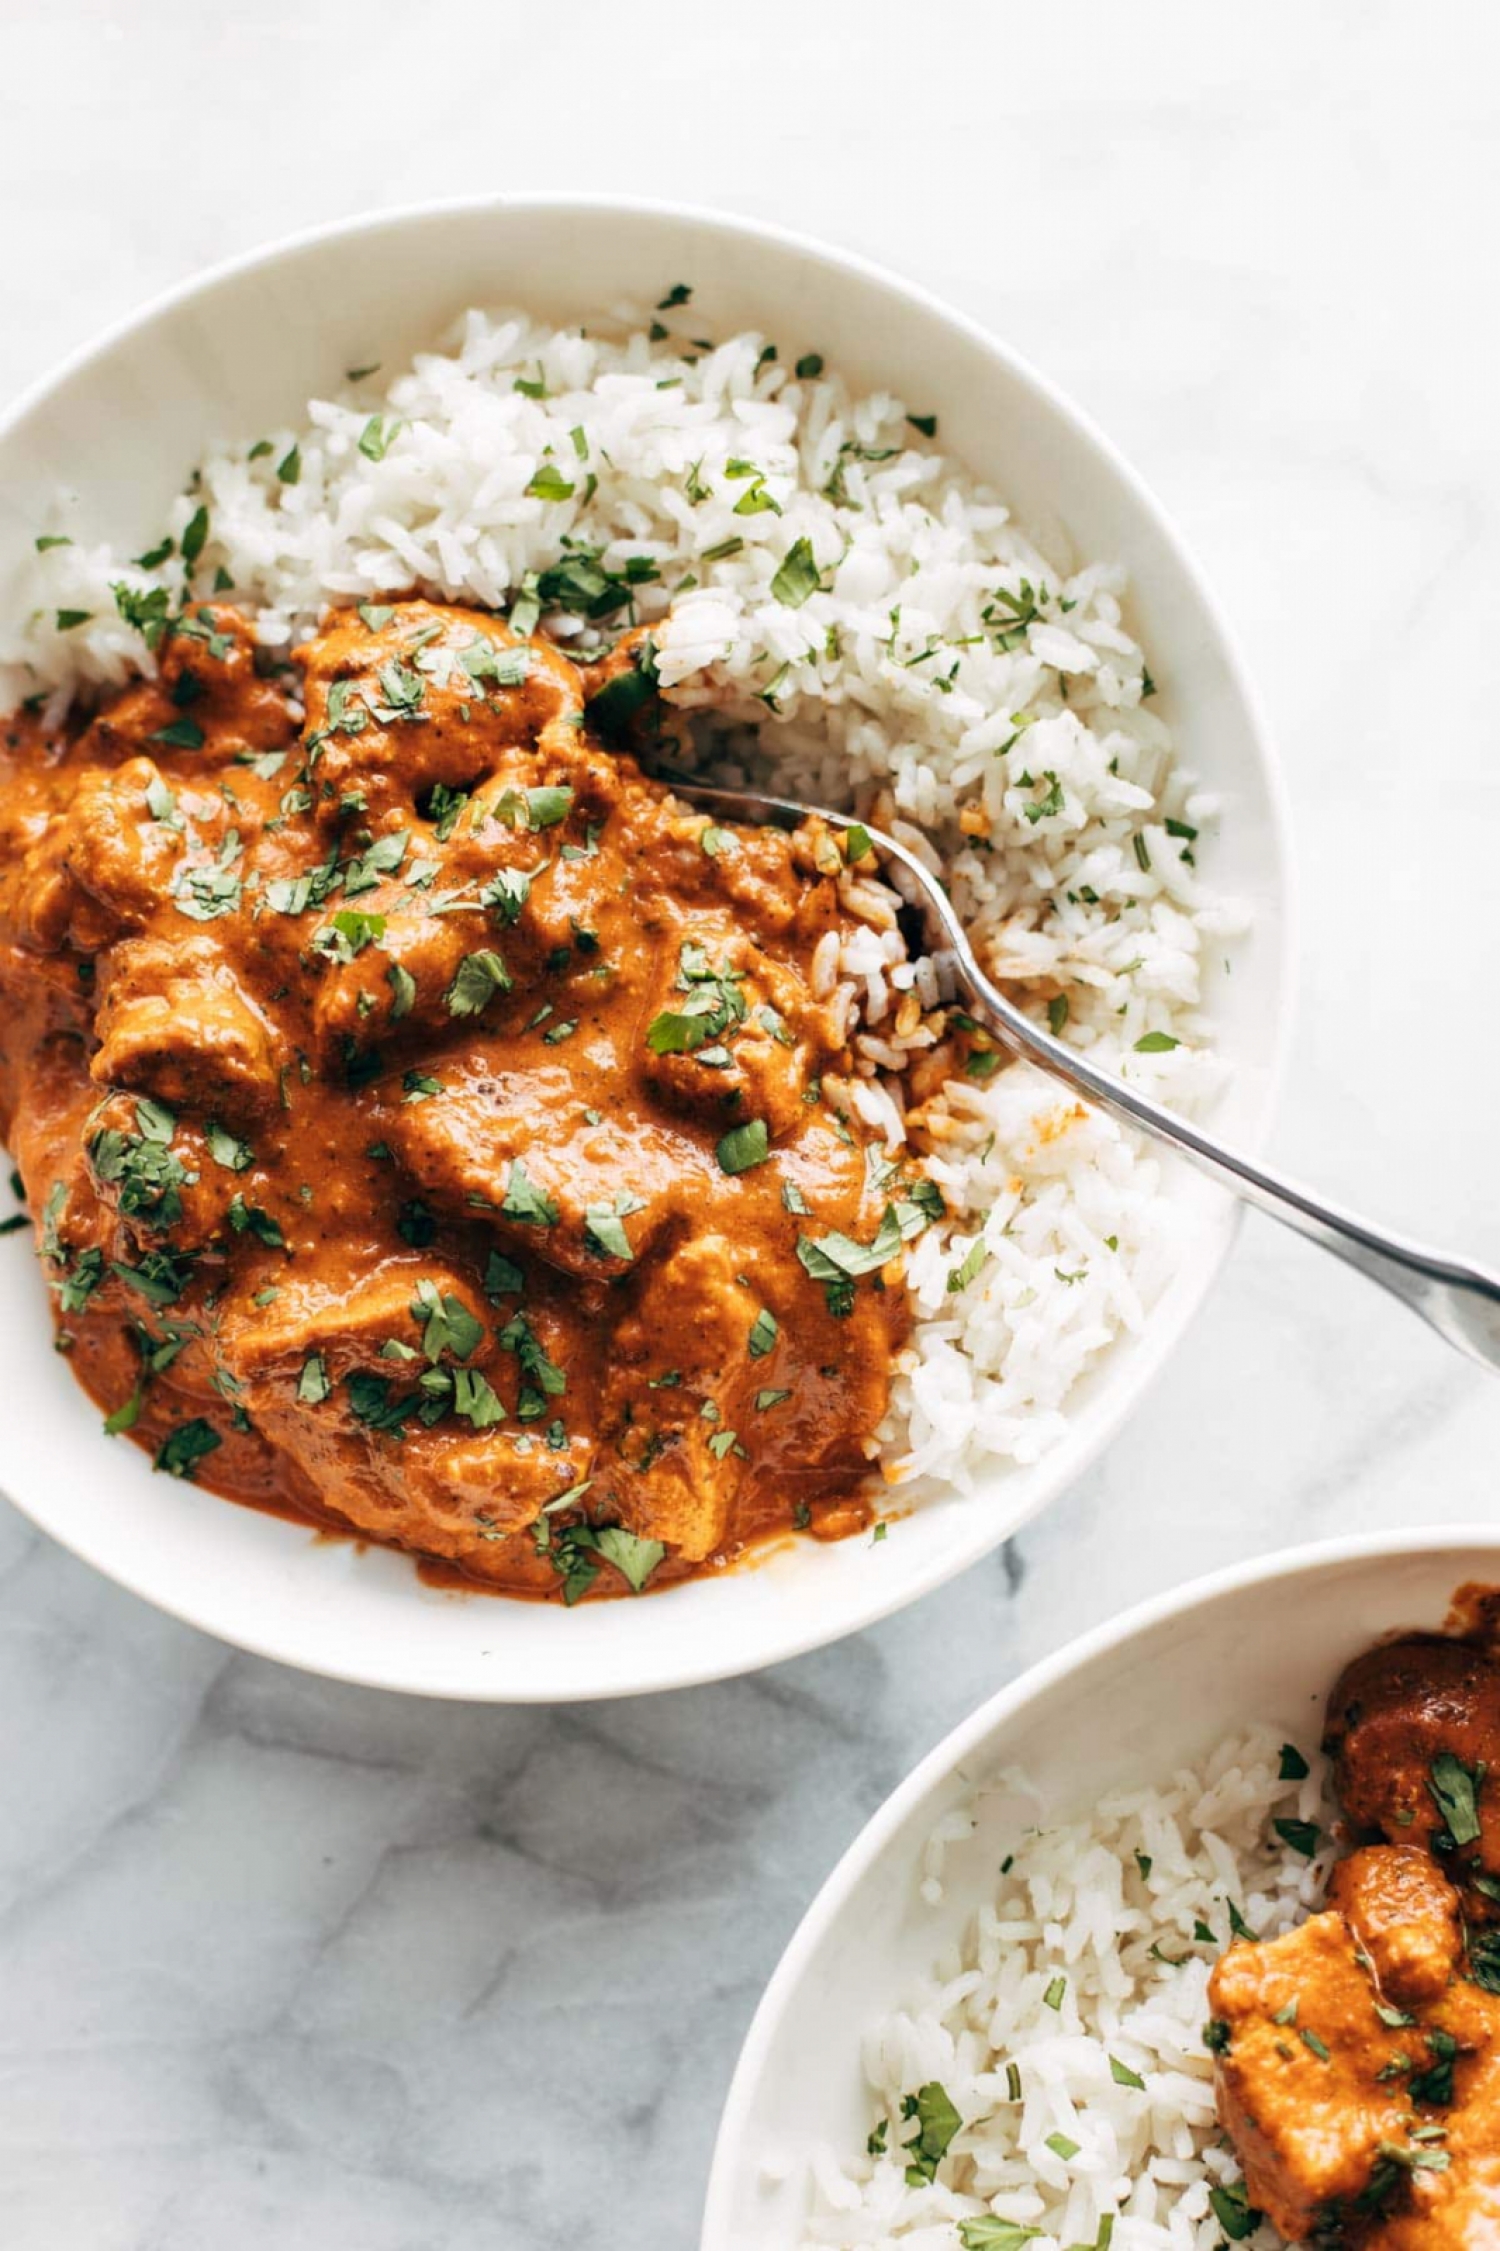 100 Delicious Chicken Dishes to Satisfy Your Every Craving